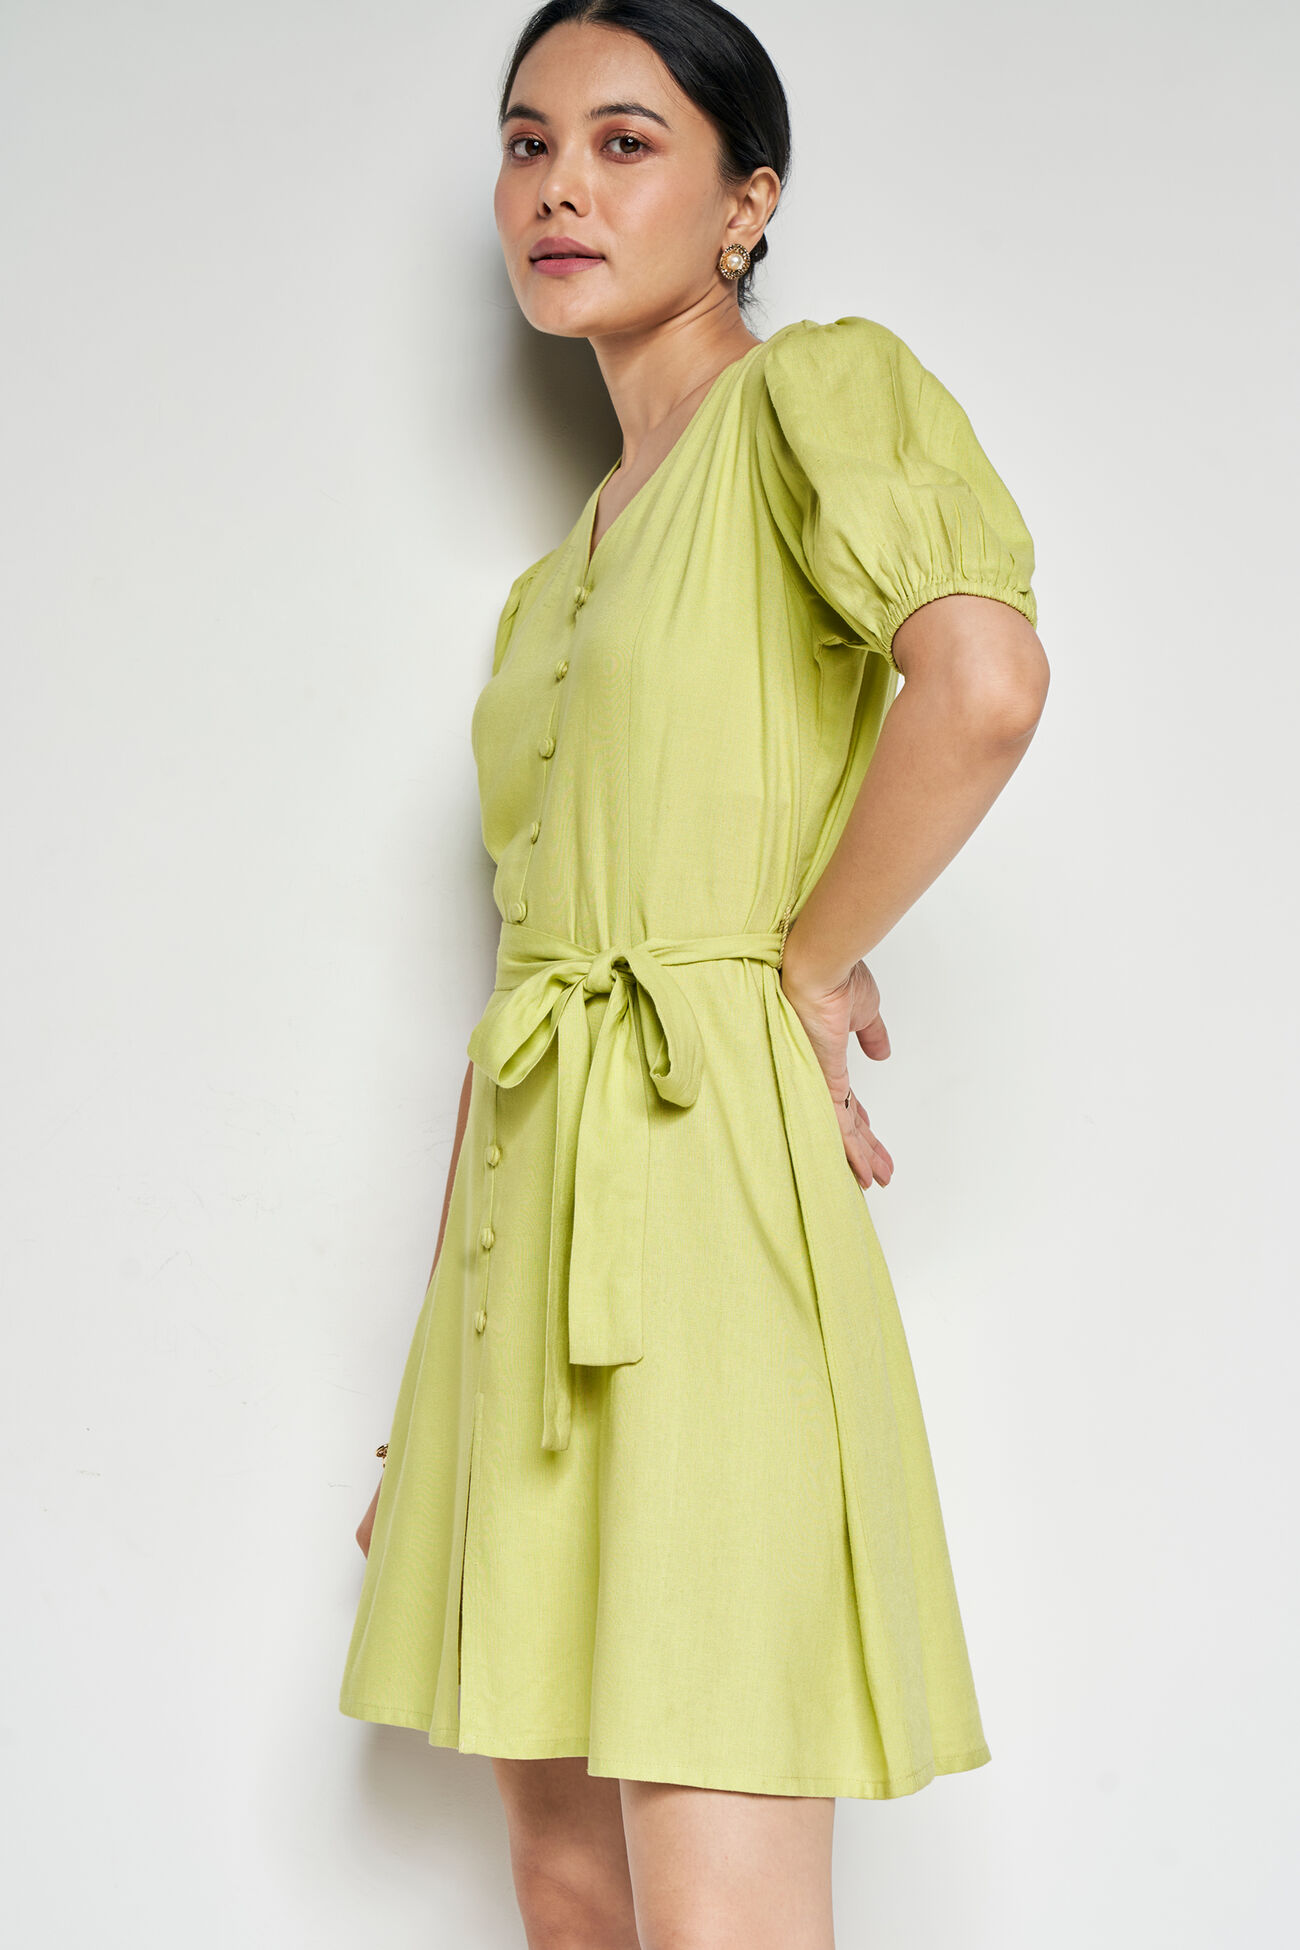 Star In Your Eyes Dress, Lime Green, image 7